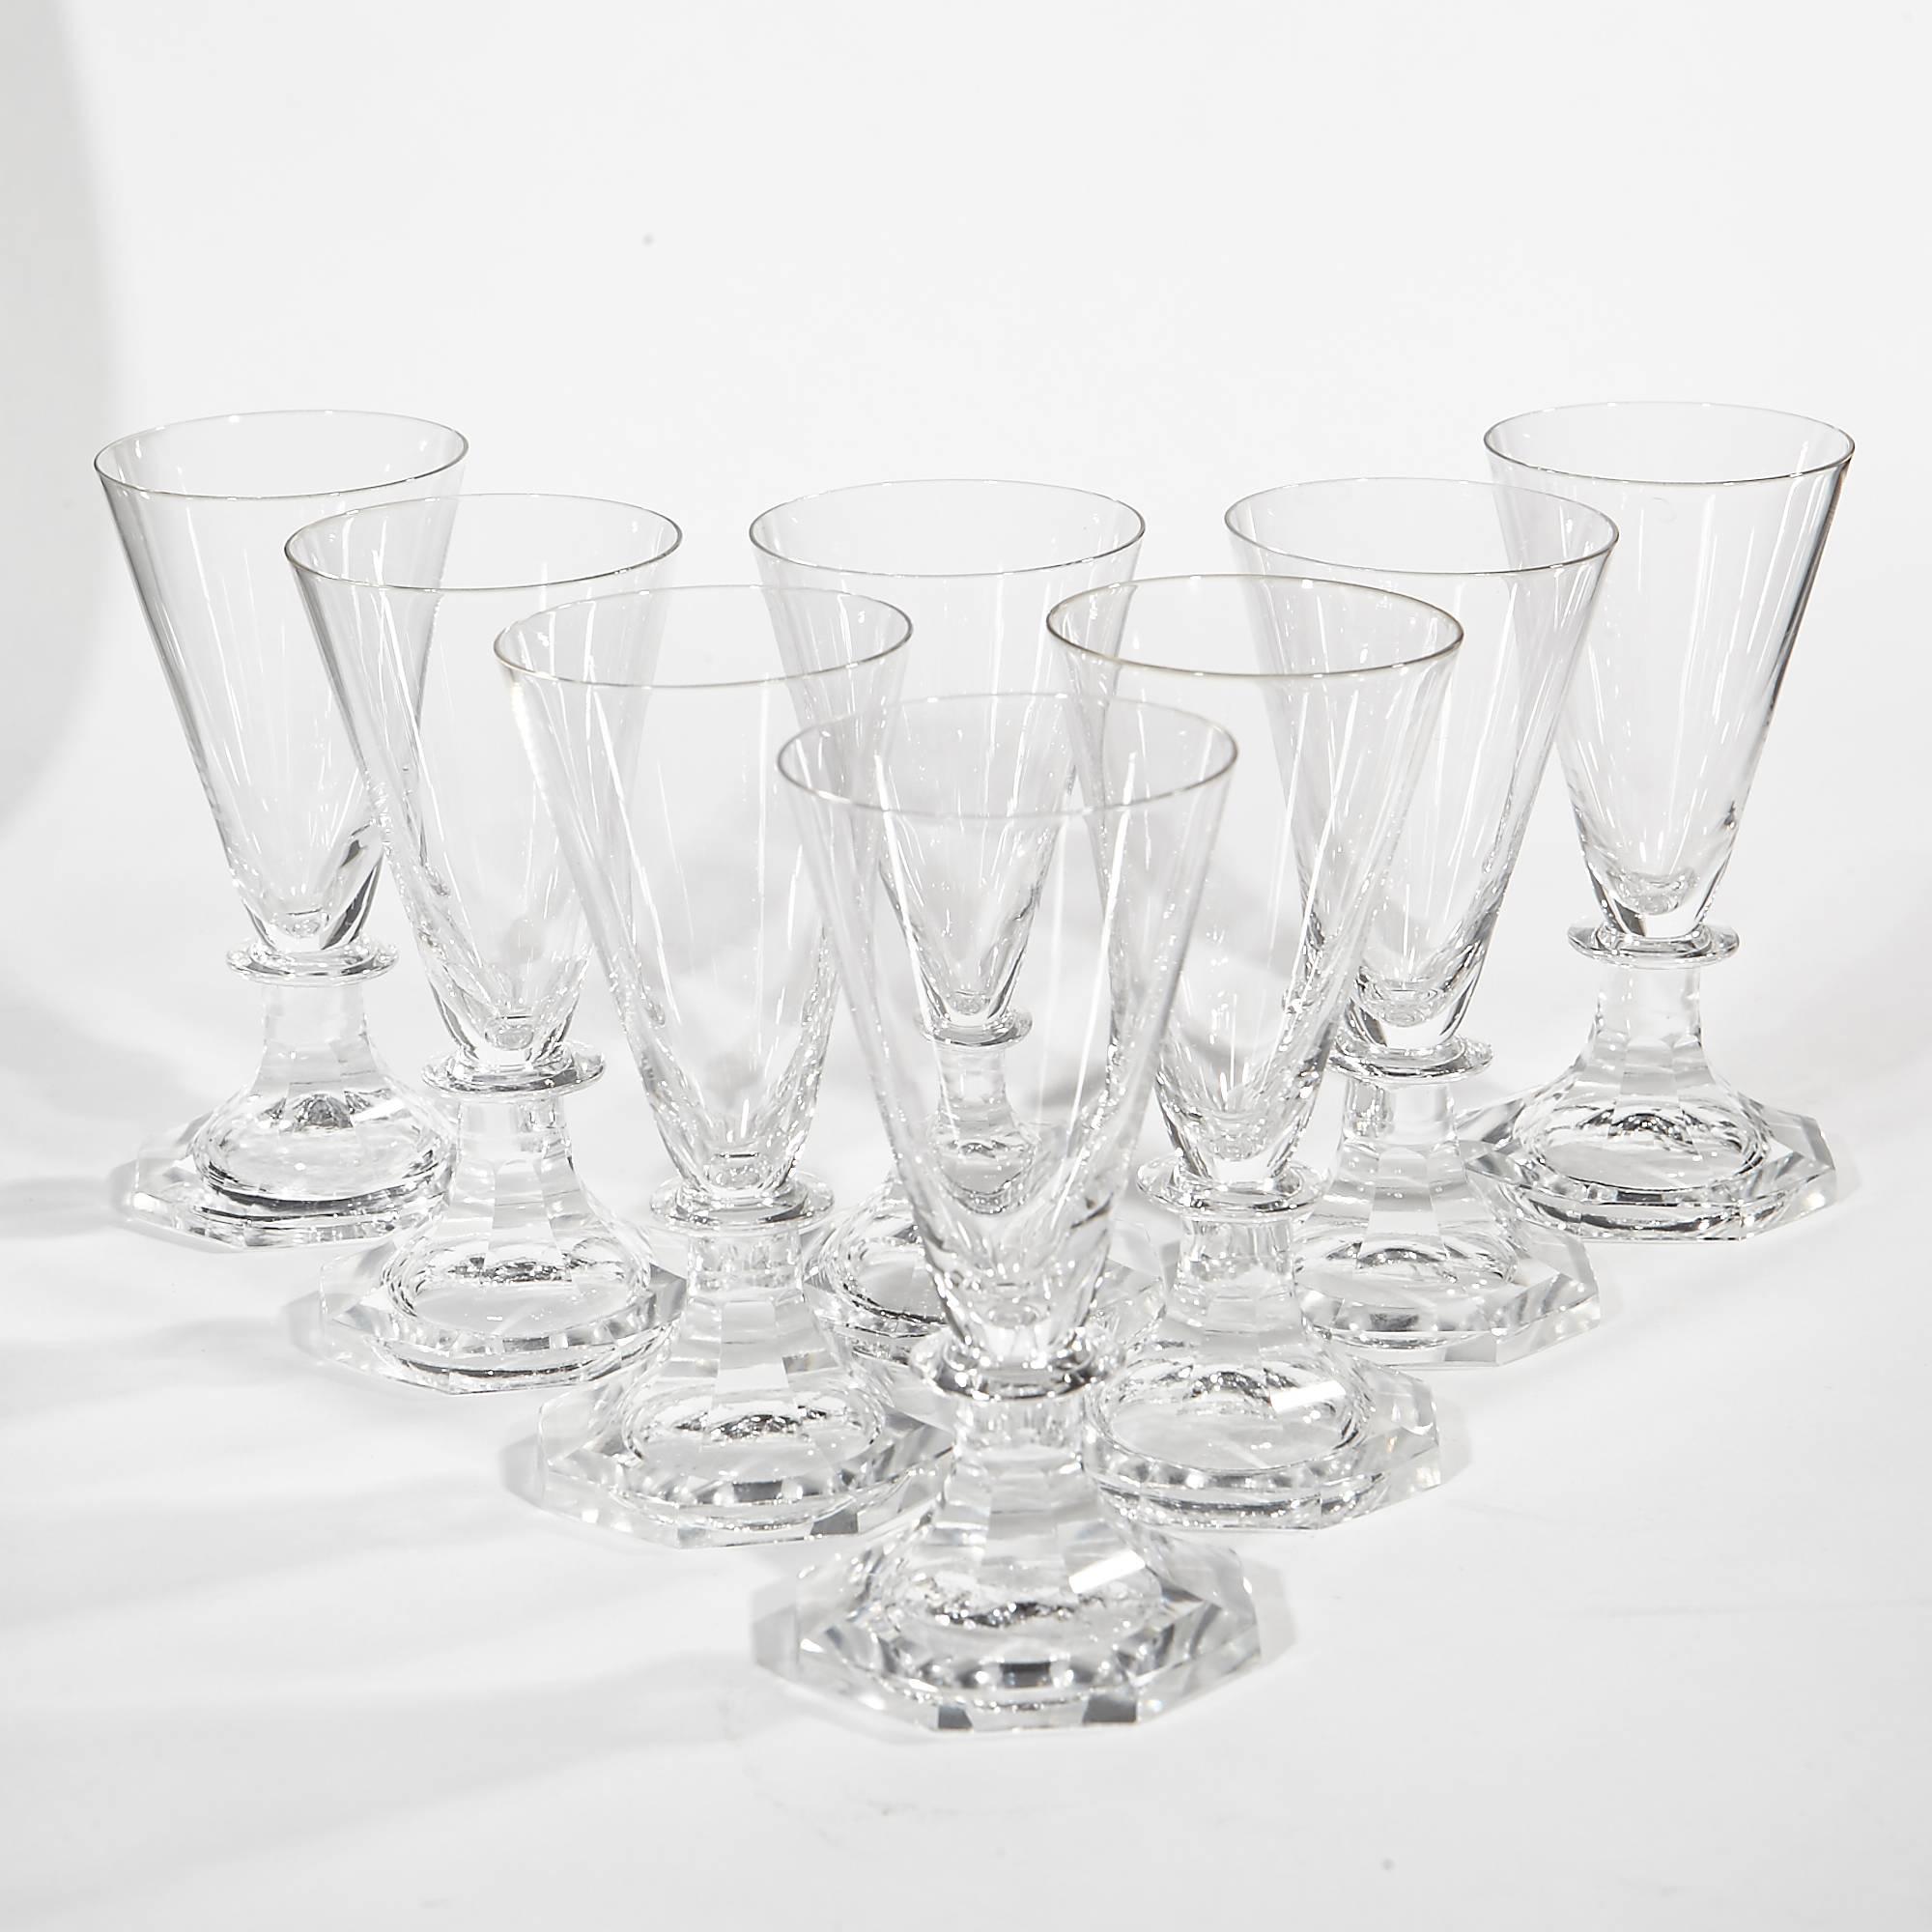 20th Century Orrefors Crystal Stems in the Seaford Pattern, 45 Pieces For Sale